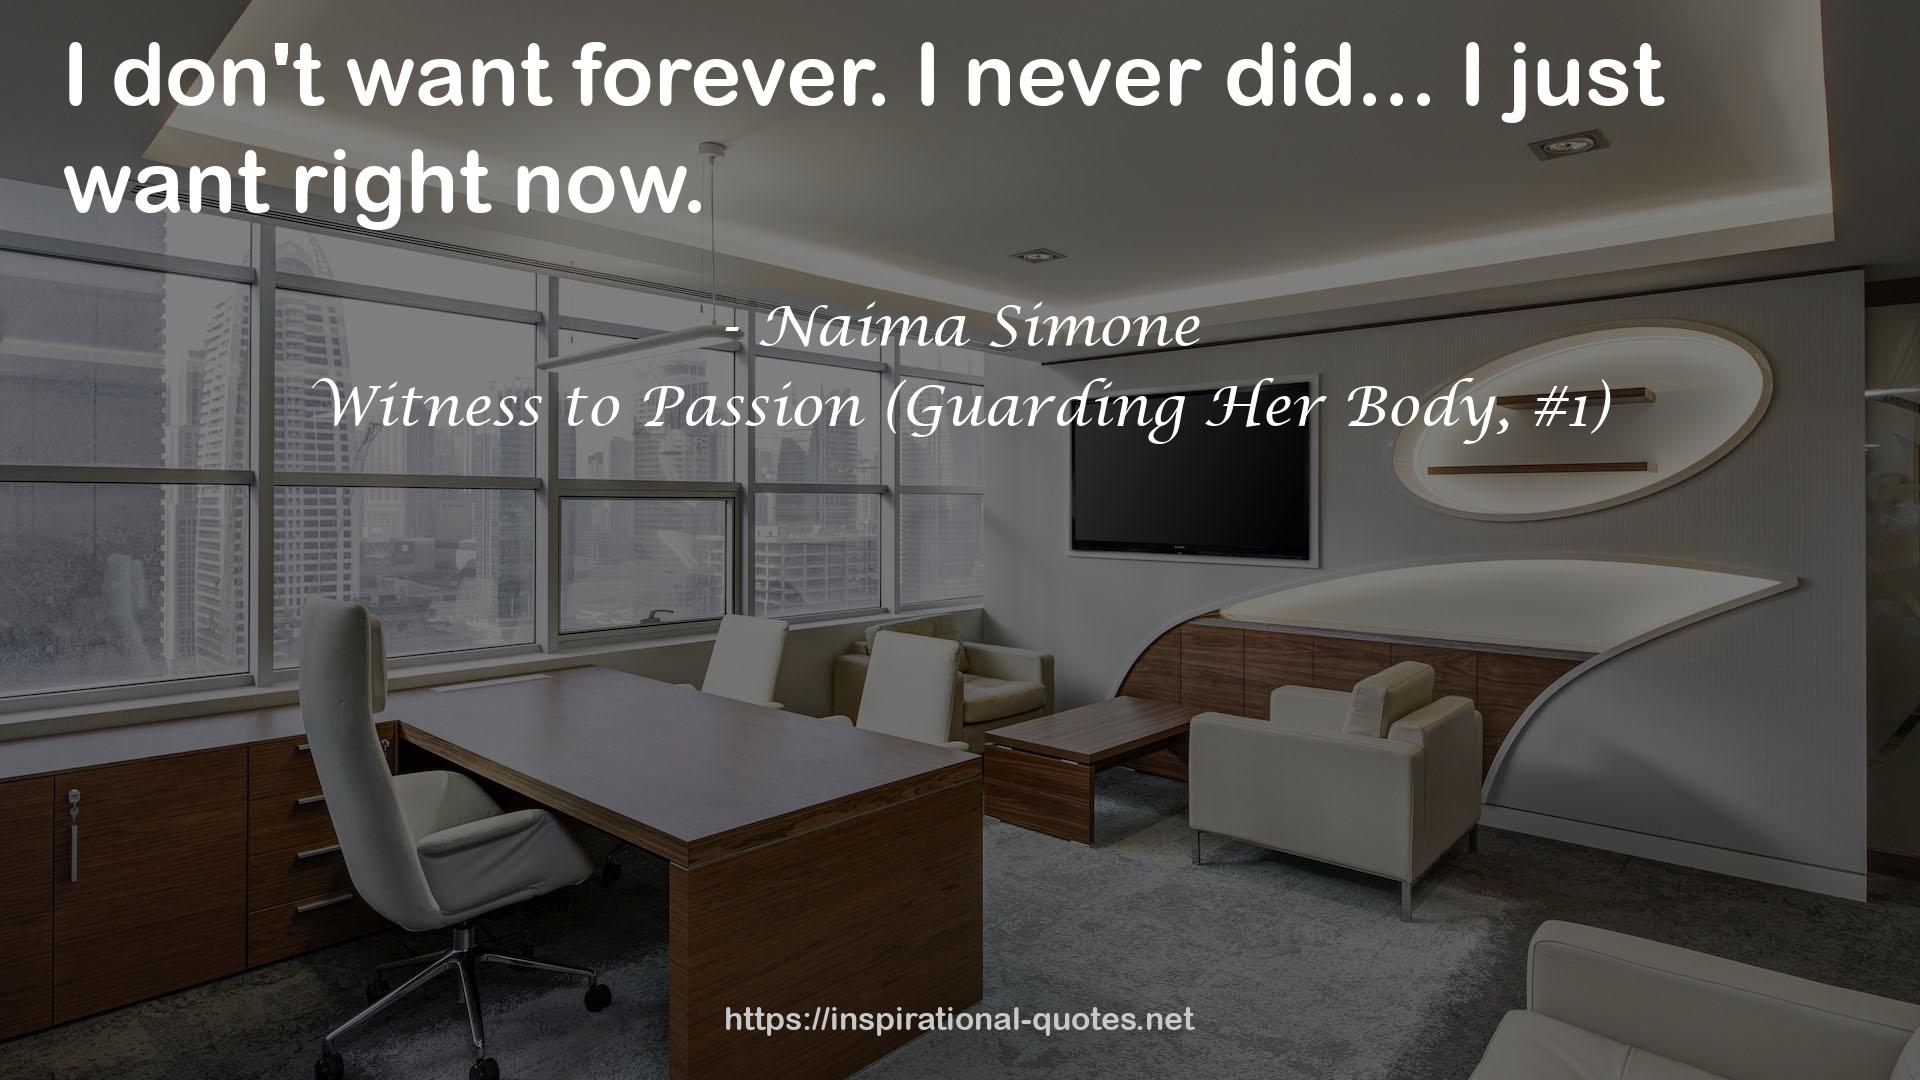 Witness to Passion (Guarding Her Body, #1) QUOTES